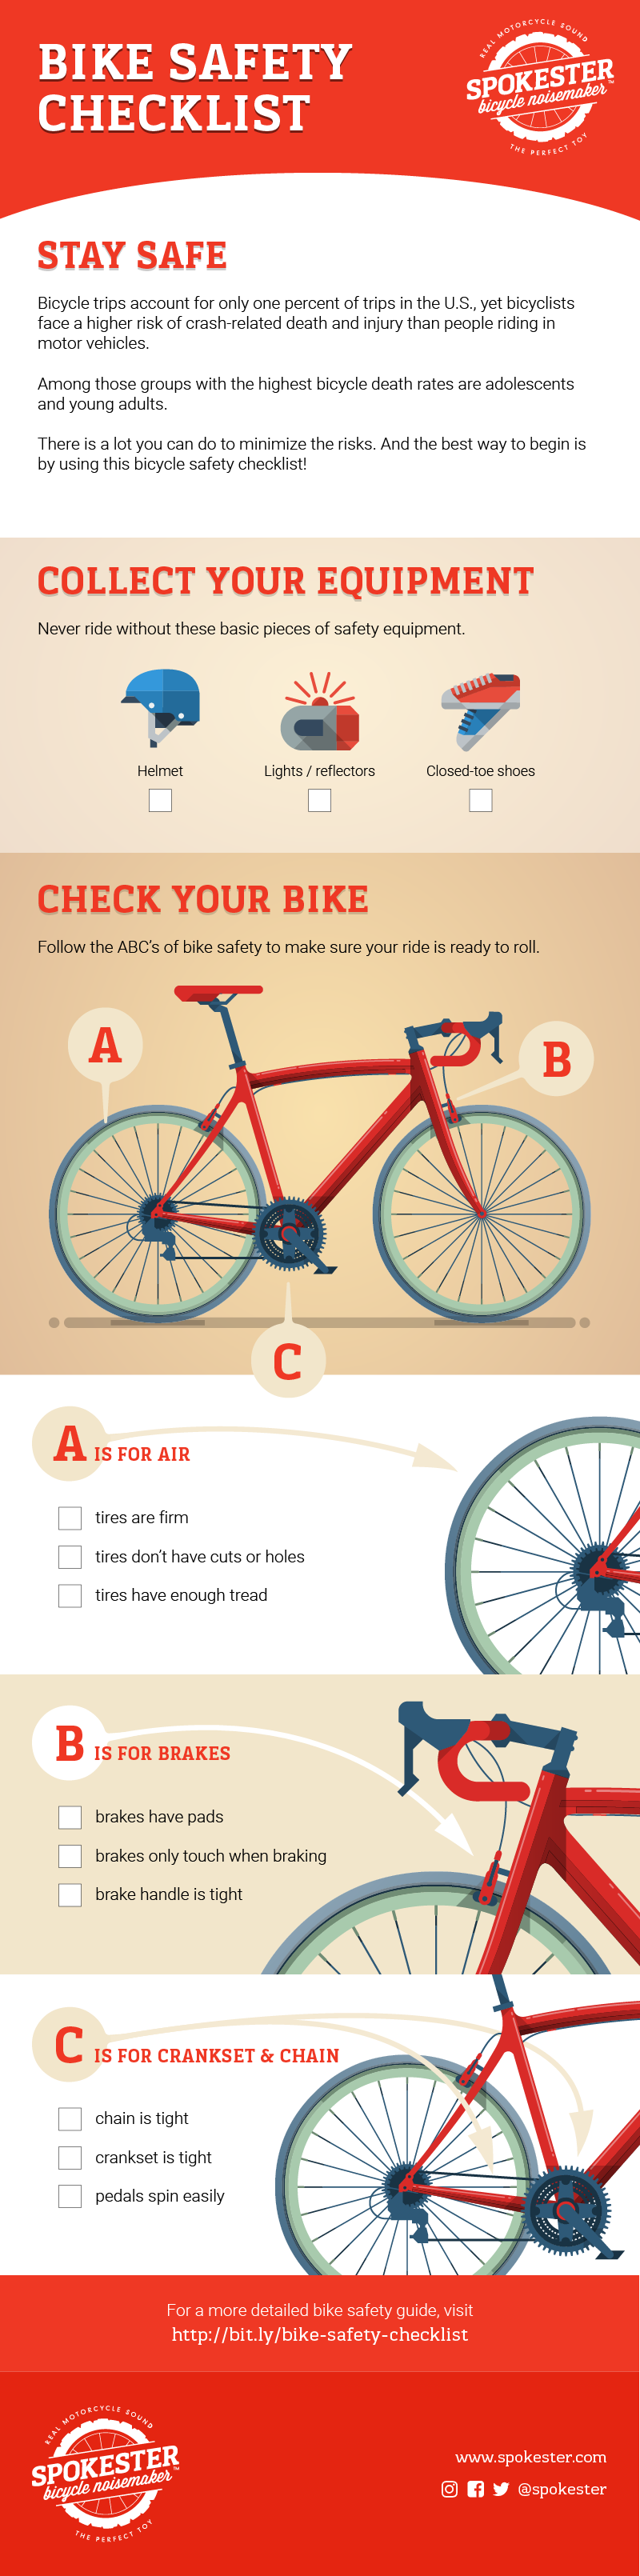 Infographic depicting the ABCs of bike safety: Air, Brakes, and Crankshaft & Chains